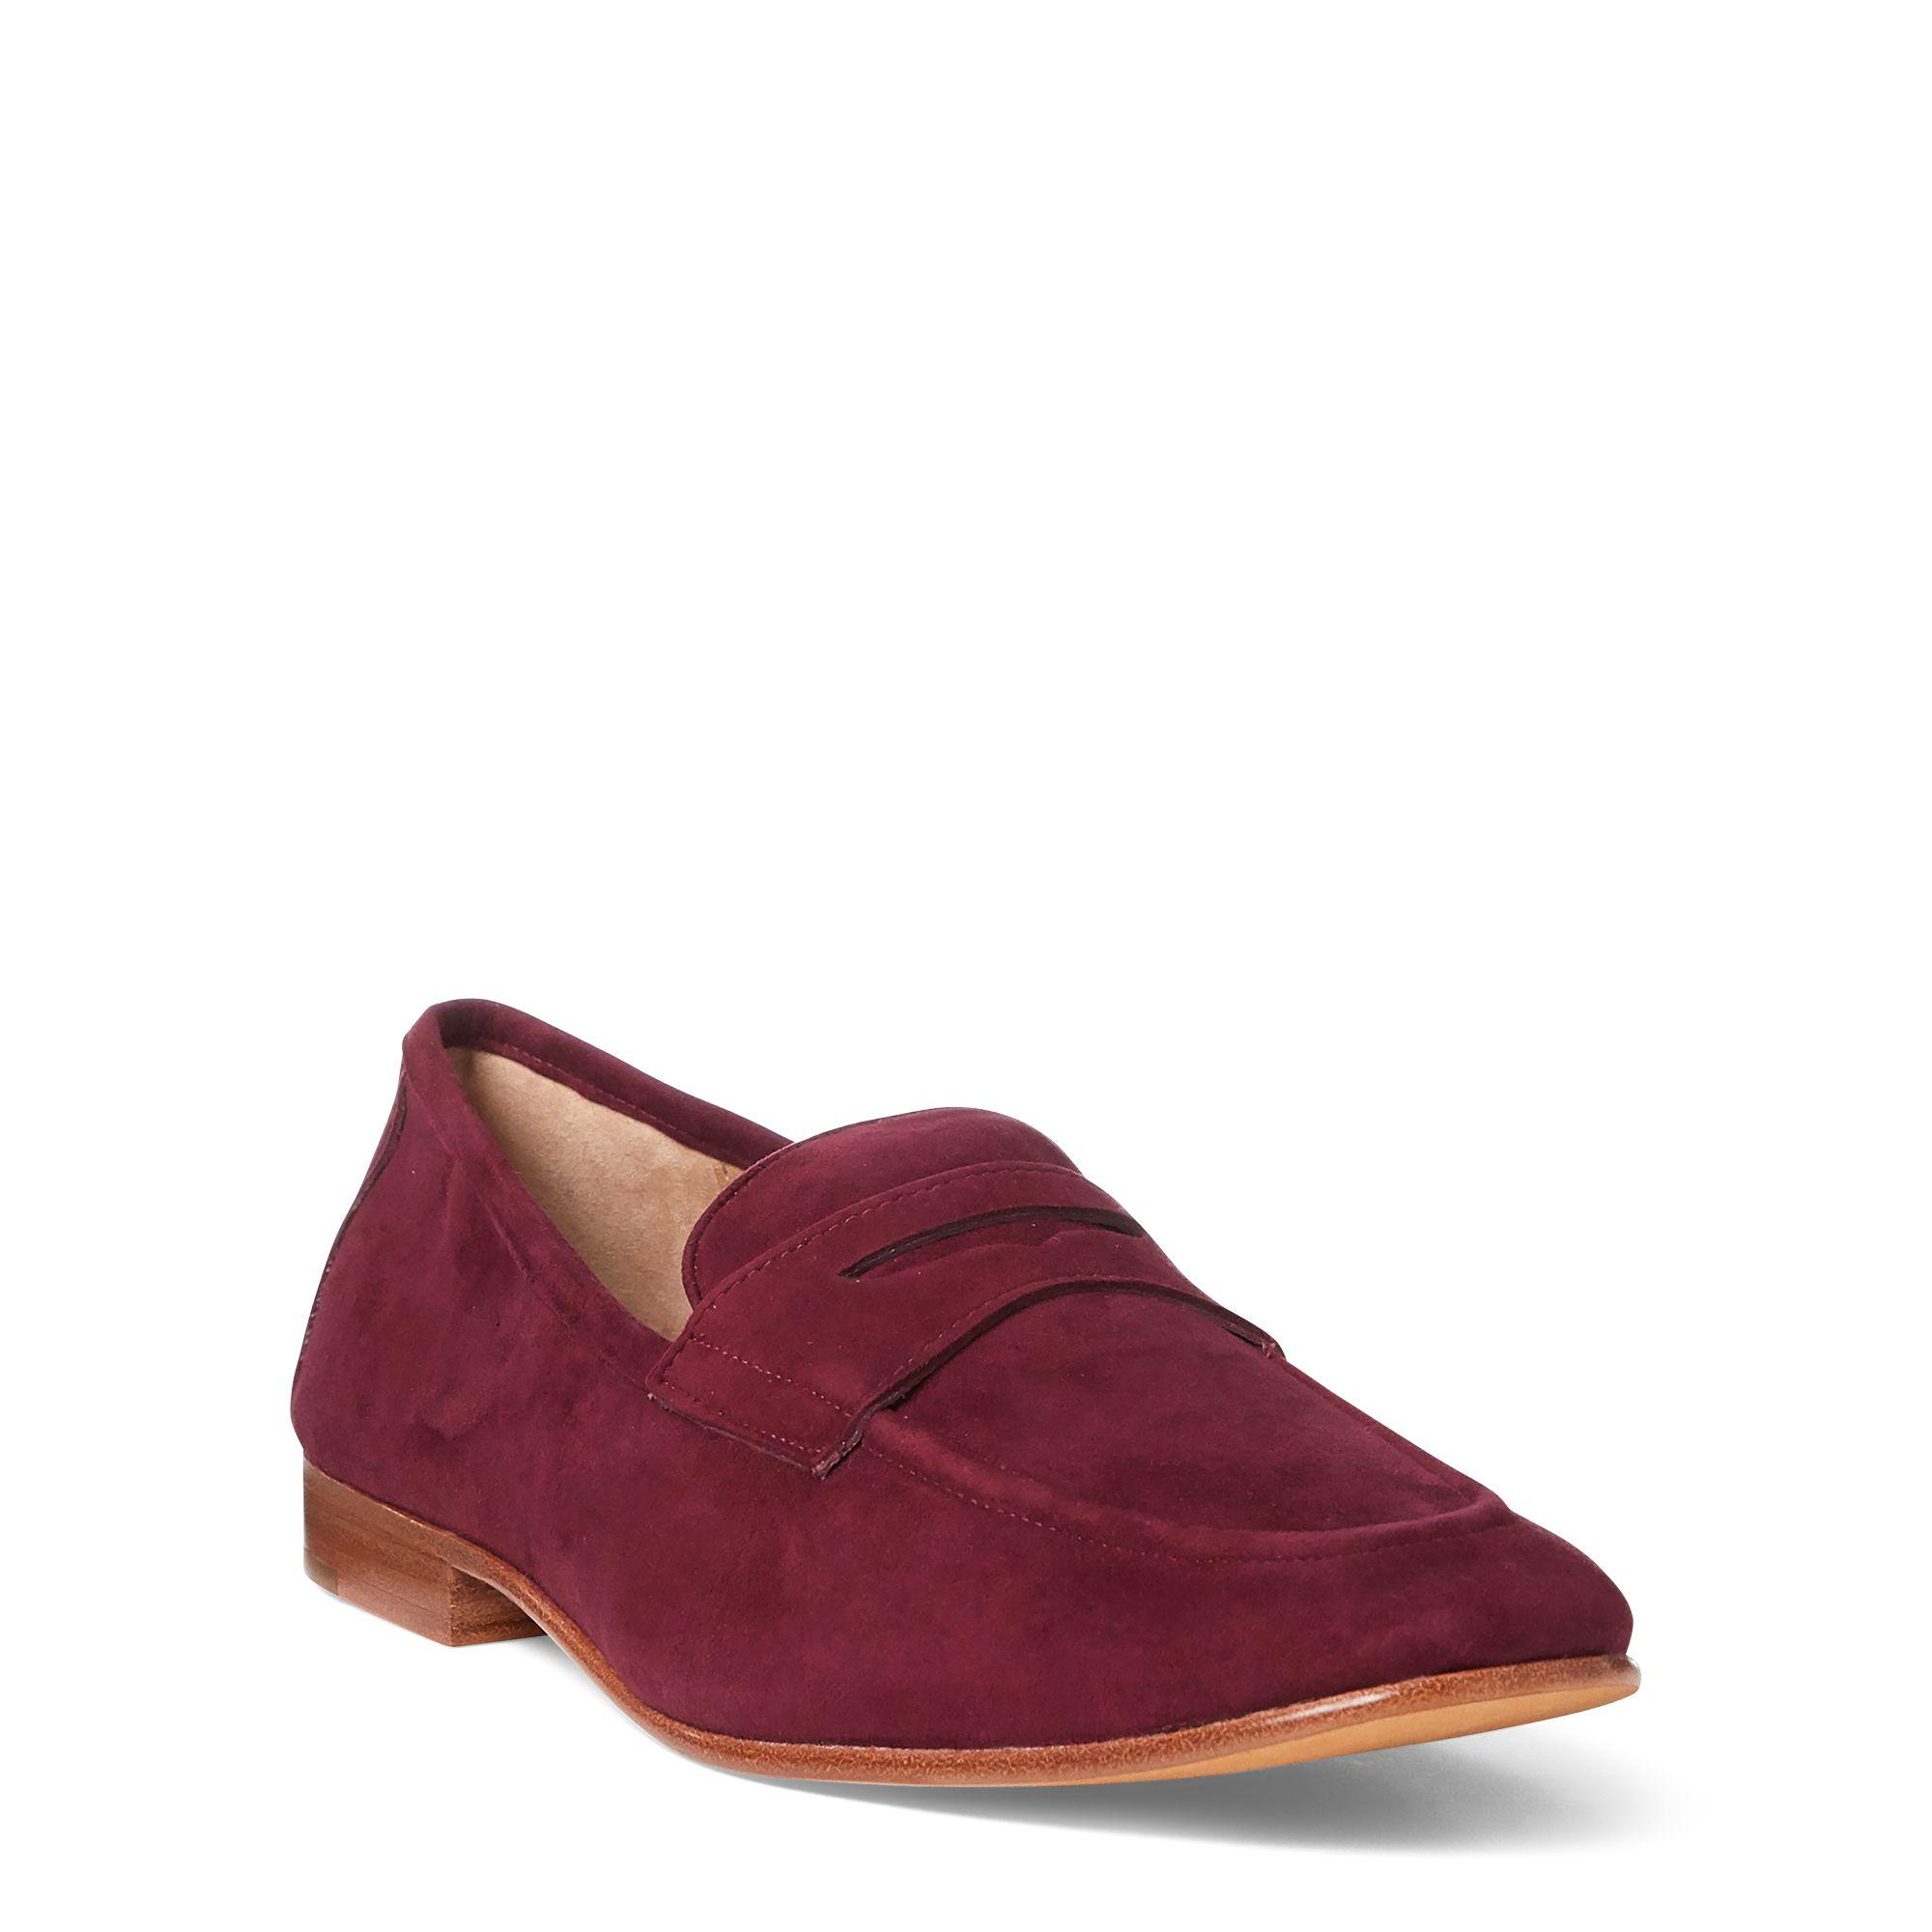 Polo Ralph Lauren Ashtyn Suede Penny Loafer in Berry (Red) - Lyst